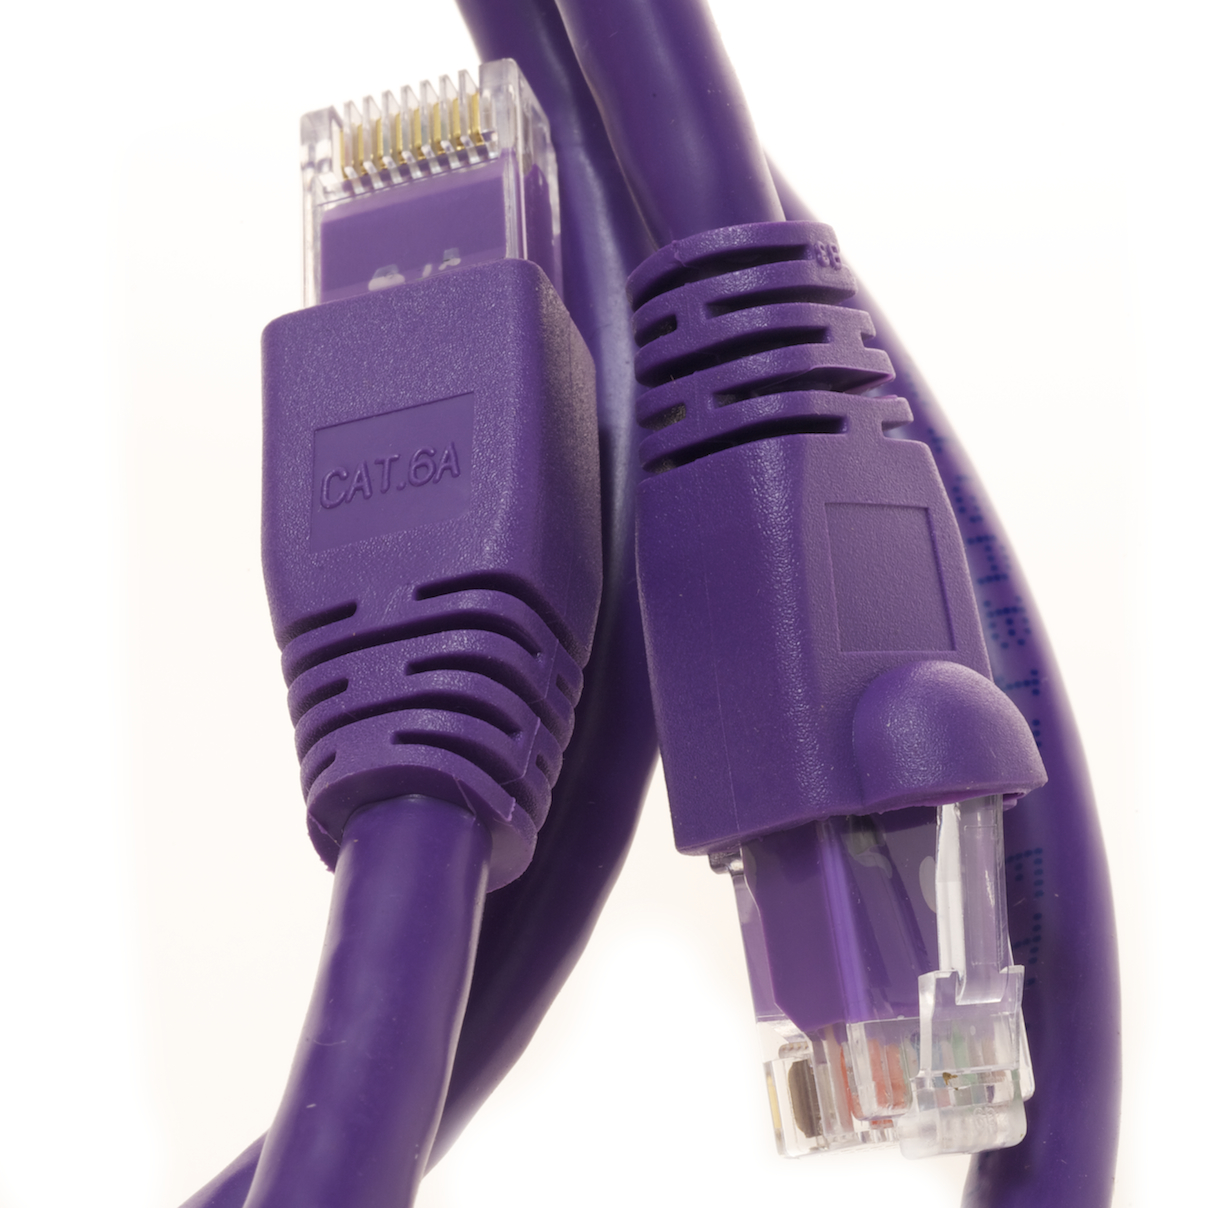 Category 6A Violet Network Cables